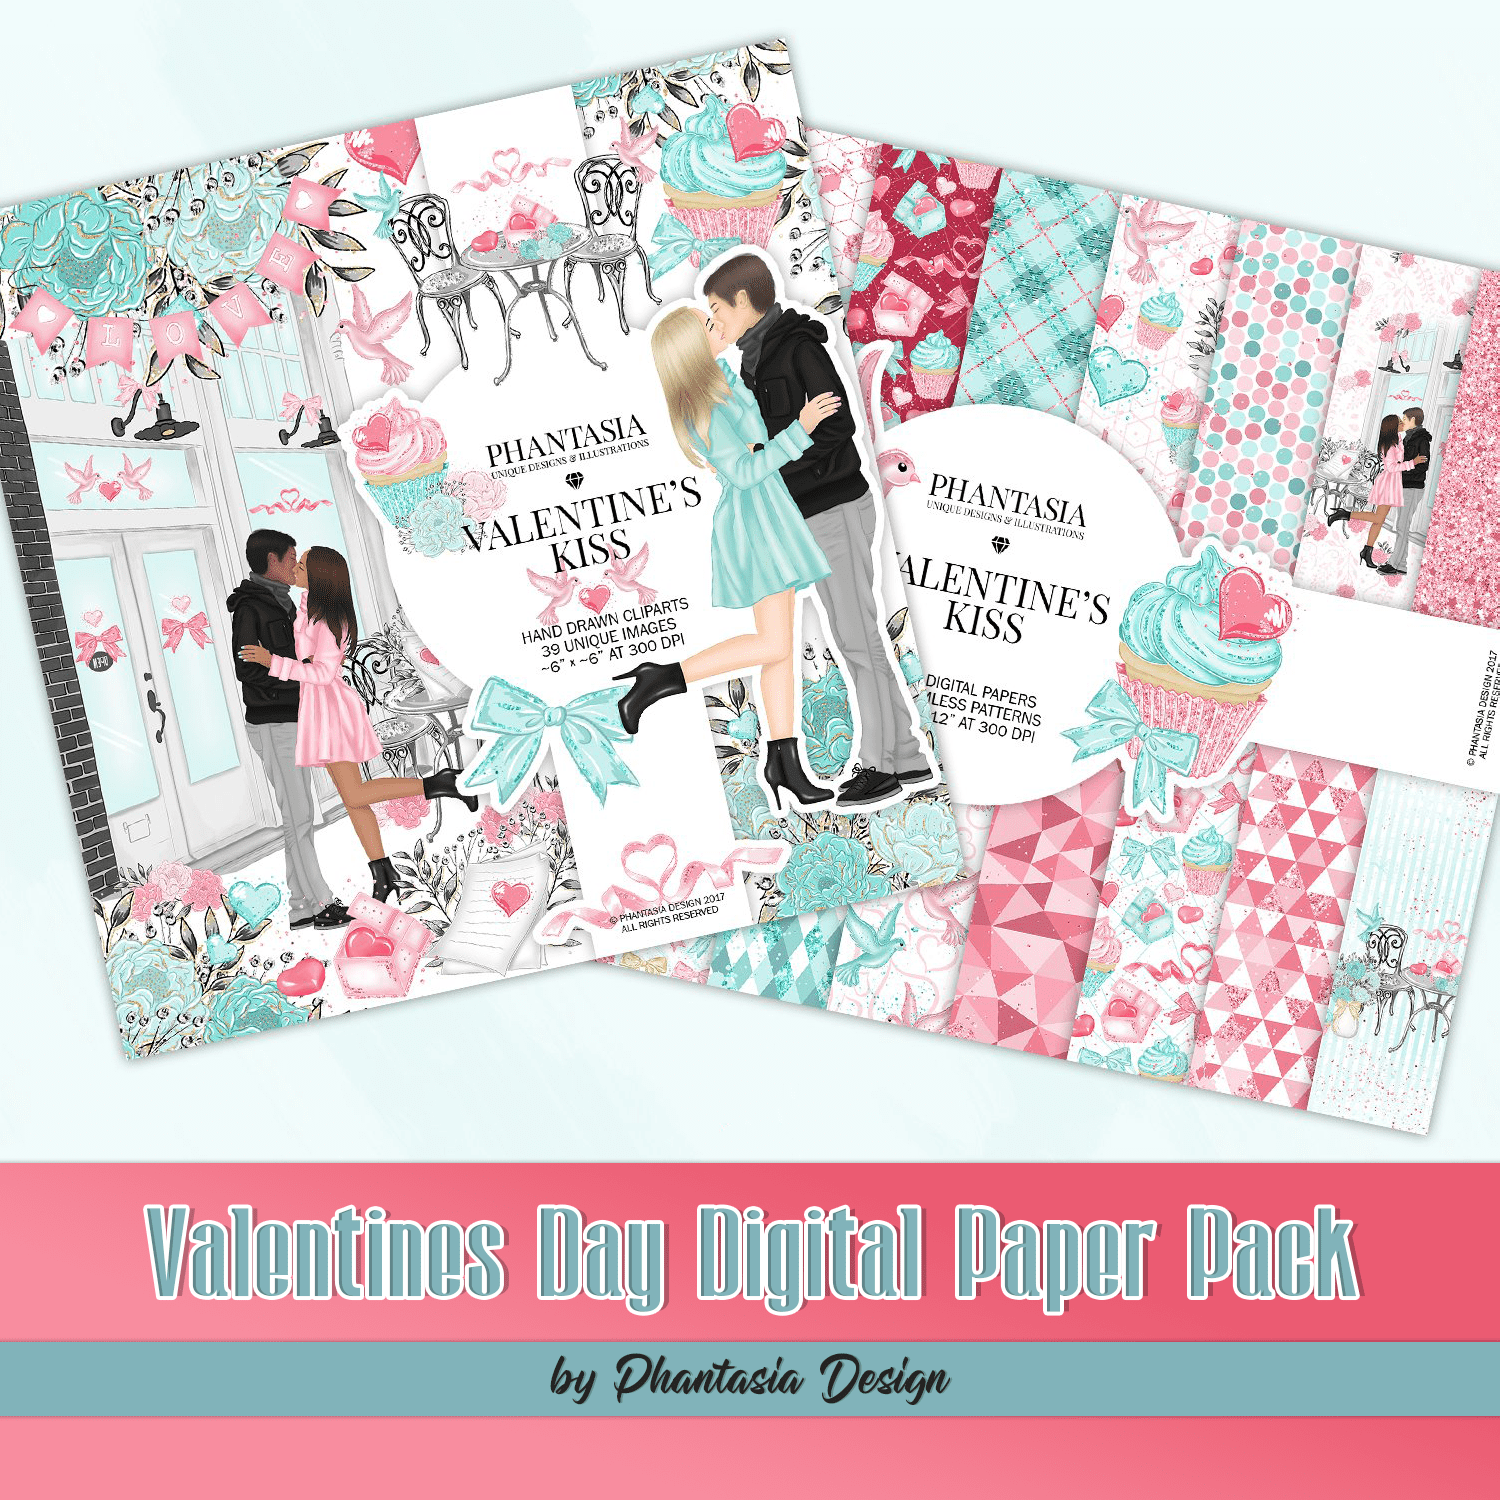 Valentines Day Digital Paper Pack by PhantasiaDesign.